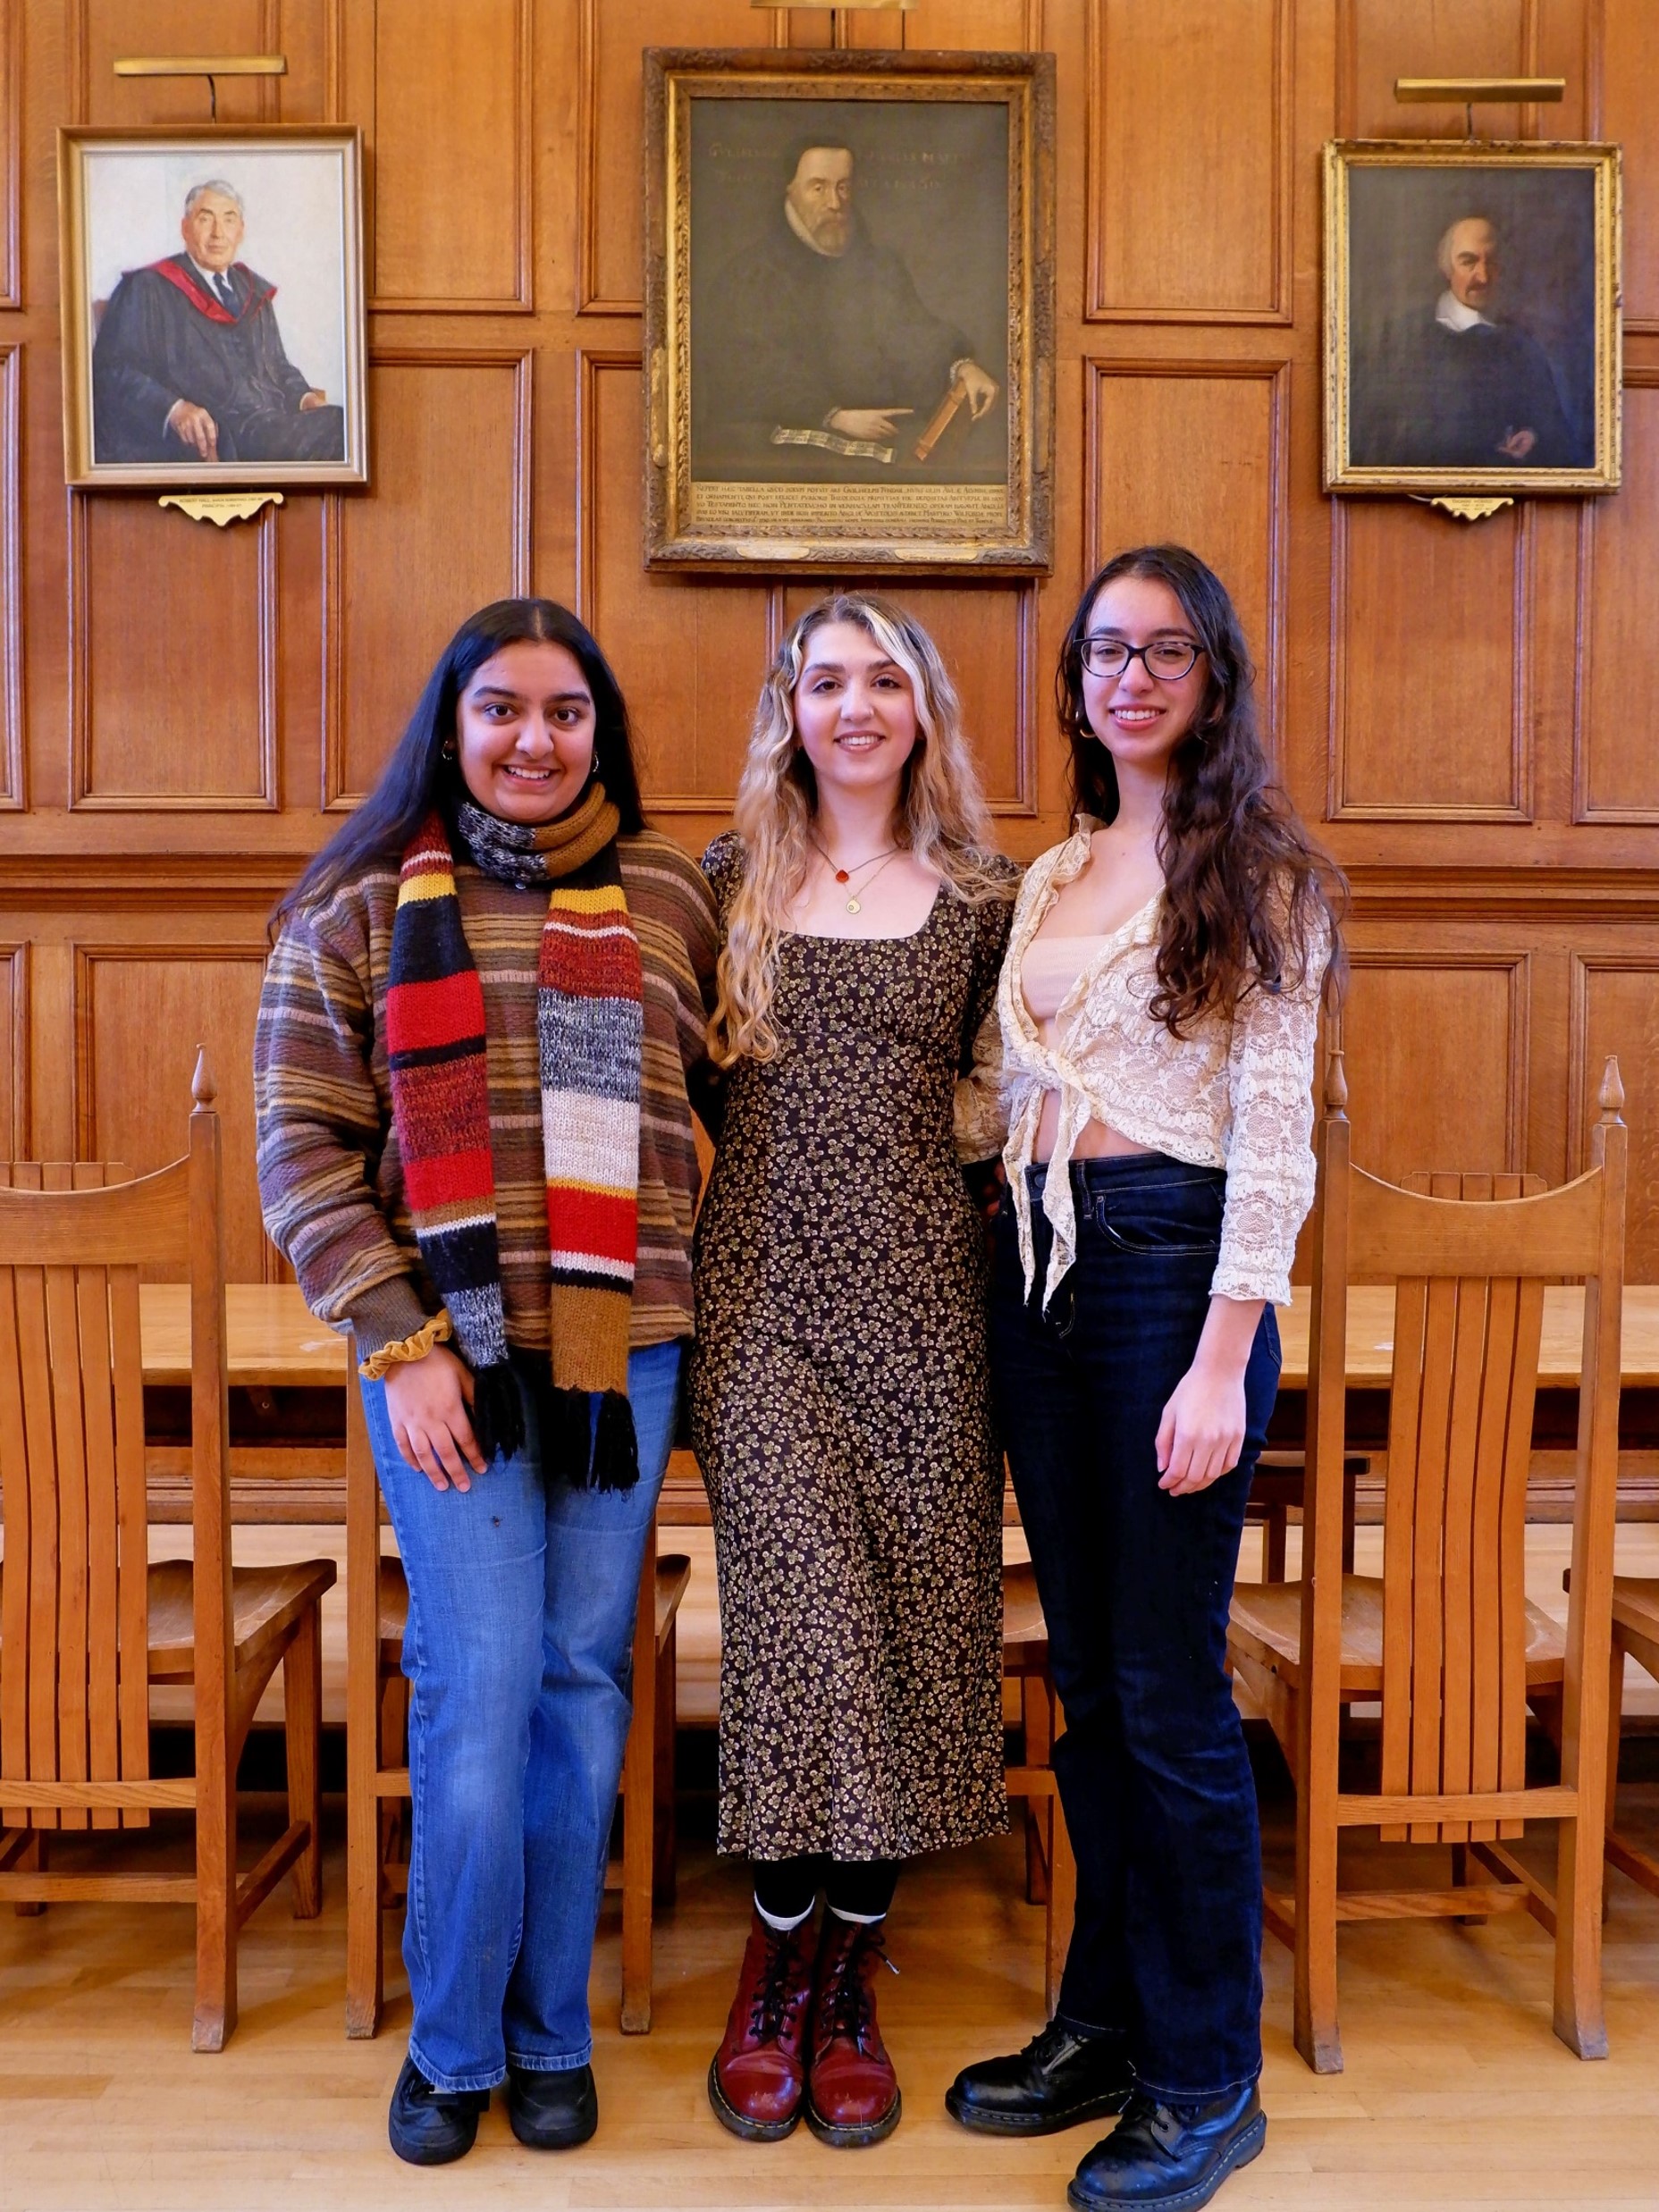 Three women stood in front of three oil paintings of men